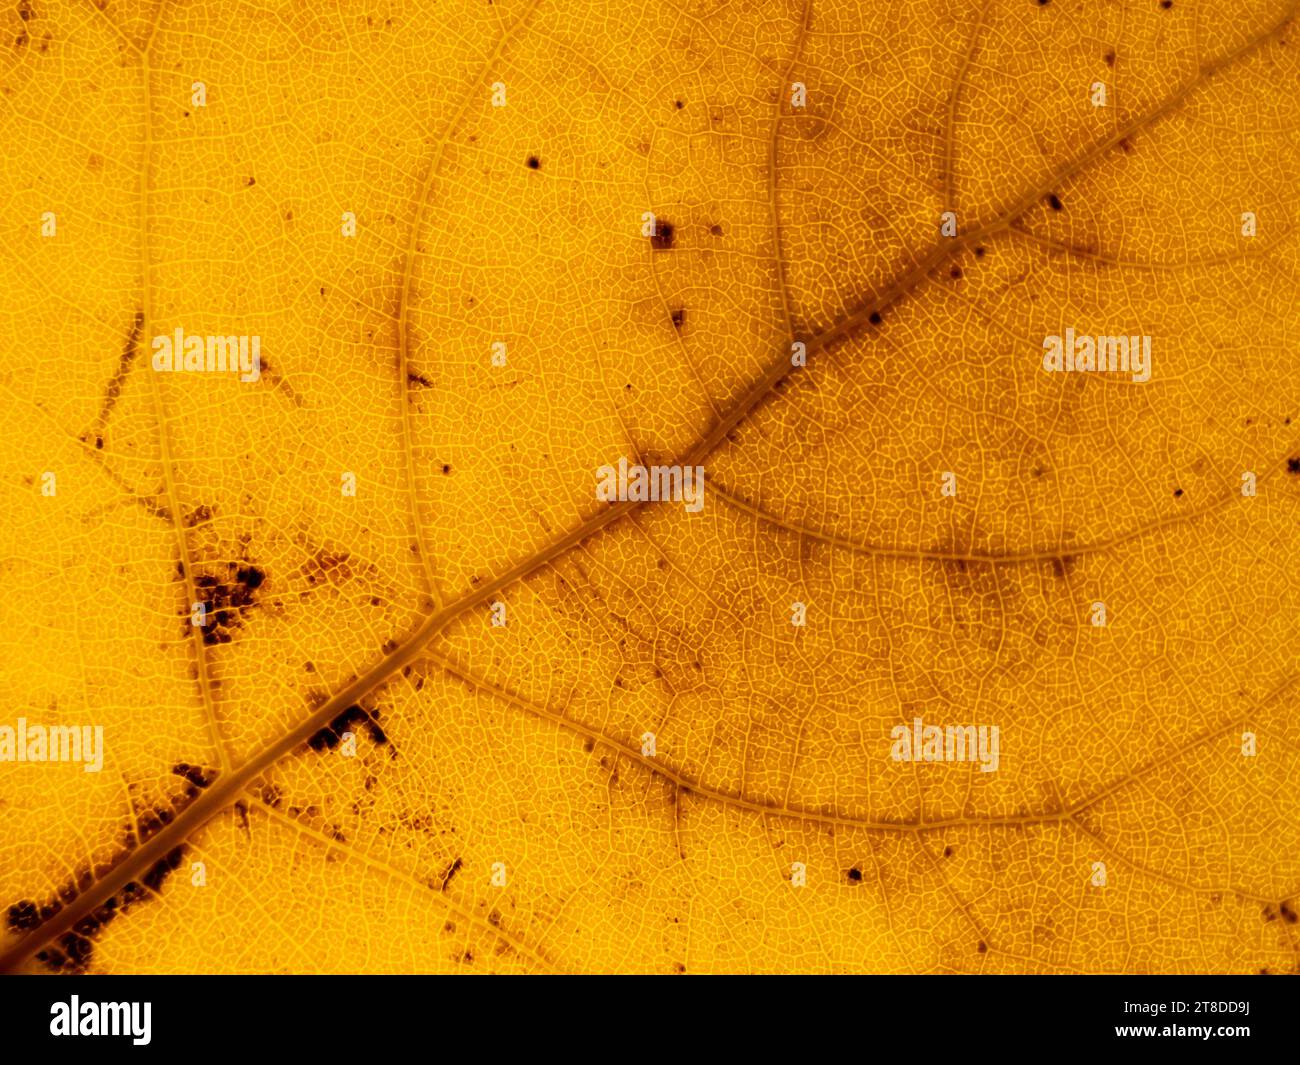 Autumn bright yellow translucent poplar leaf texture with veins closeup. Fall background with diagonal composition. Stock Photo